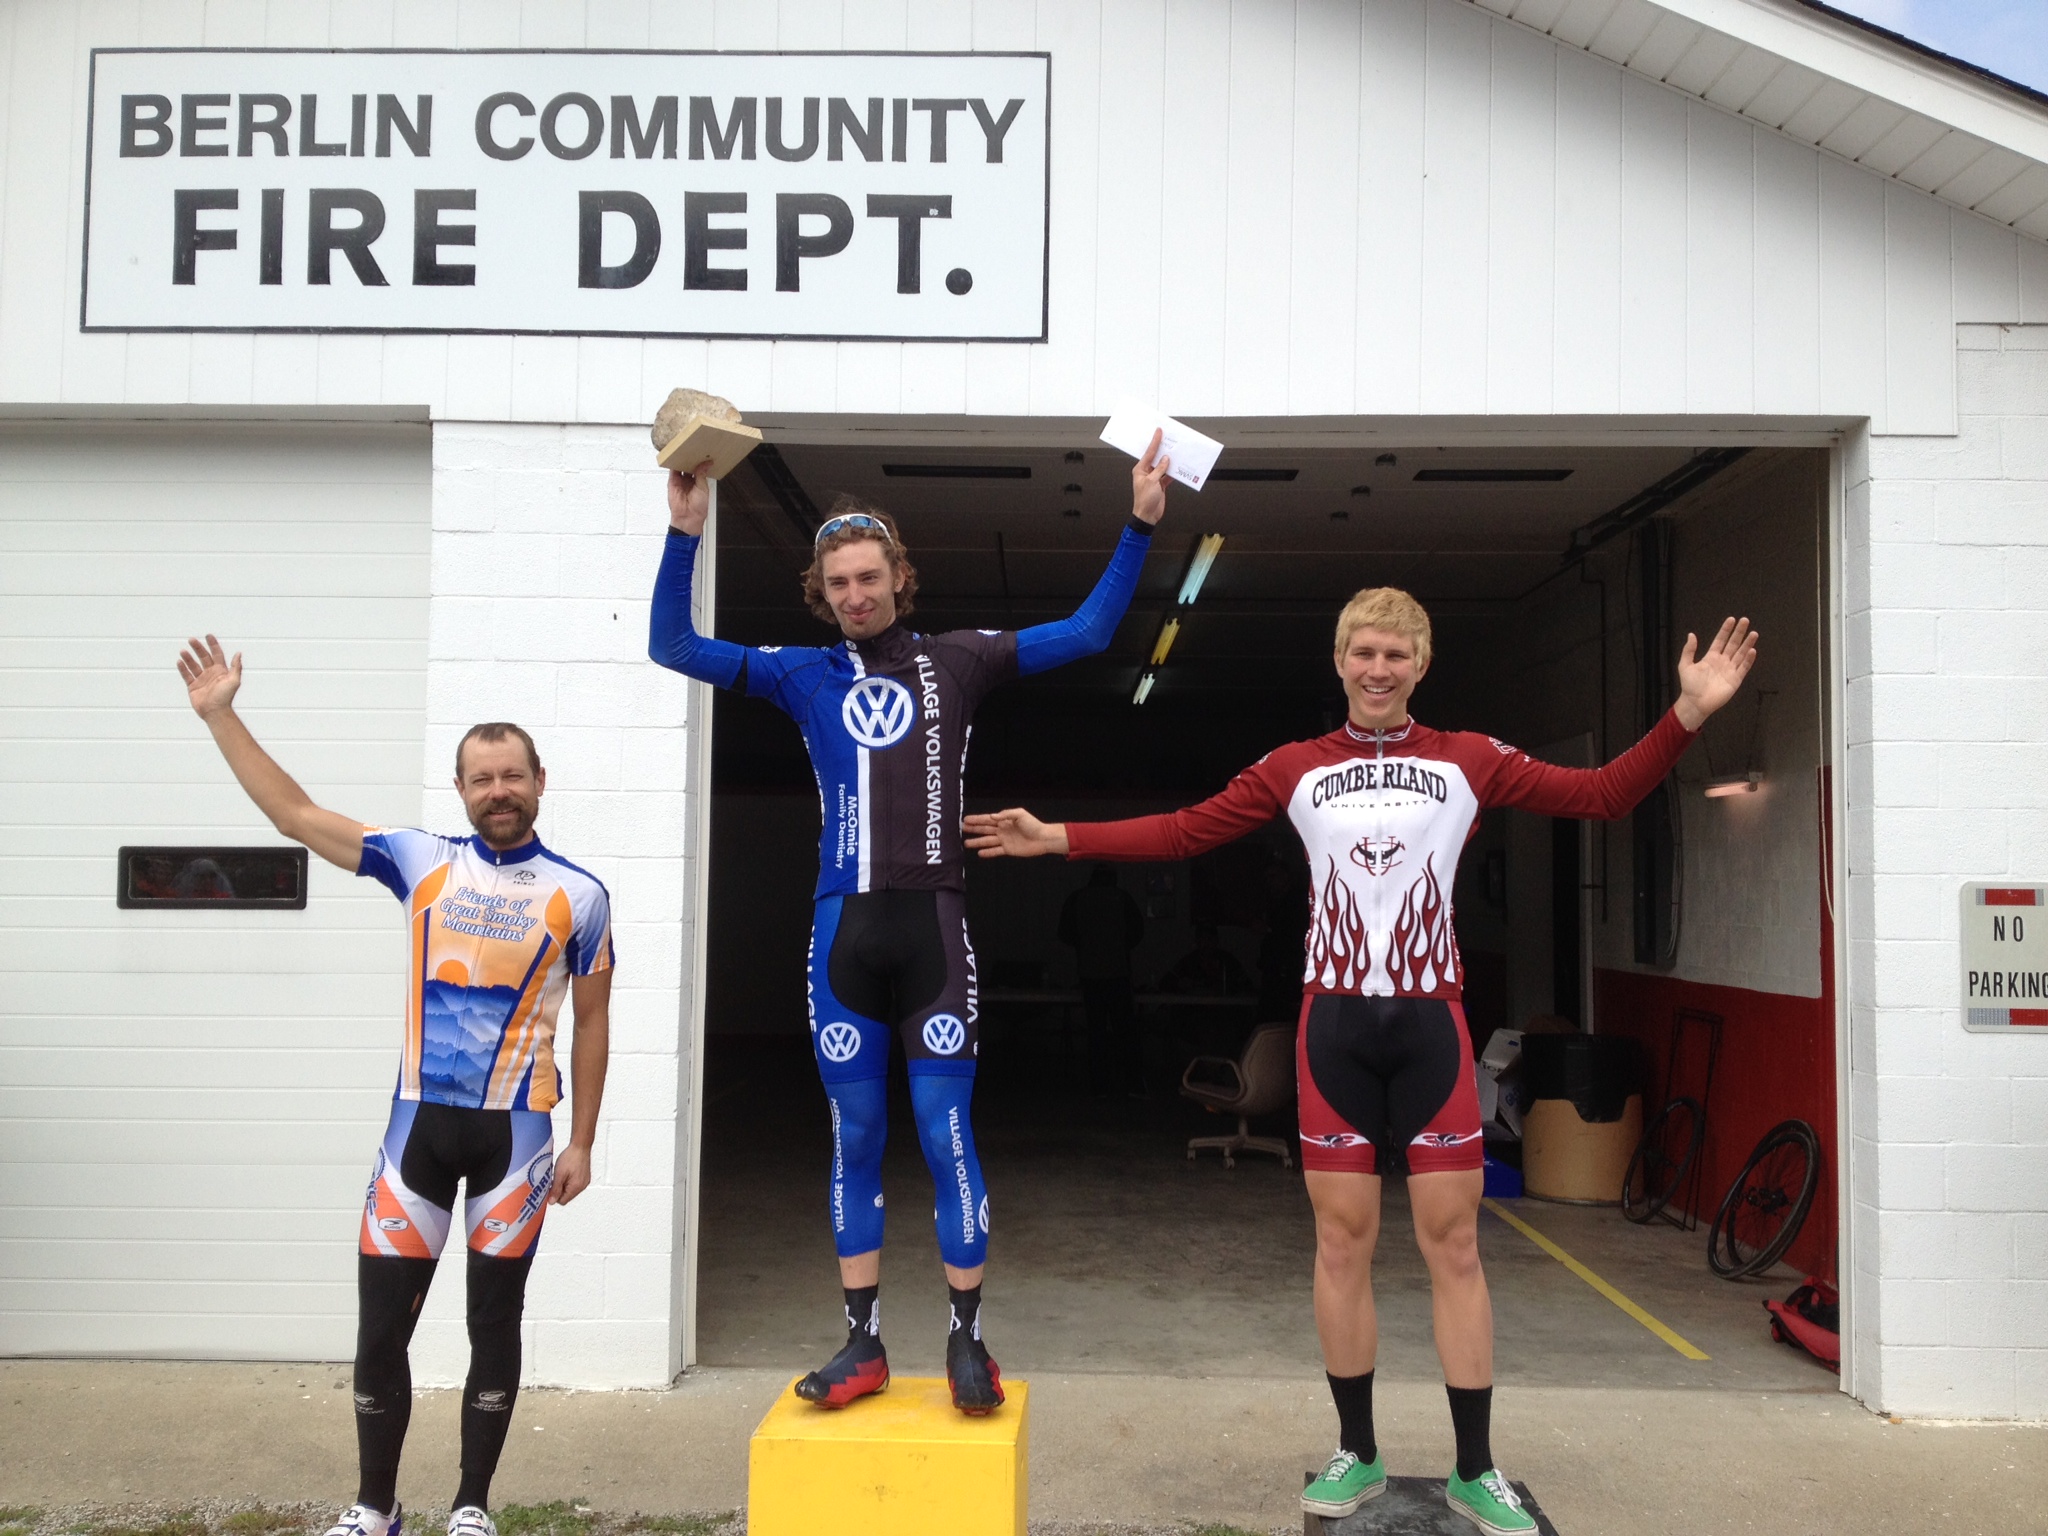 Hell of the South 2013 Pro/1/2 podium - Me, AJ Meyer, Tommy Schubert